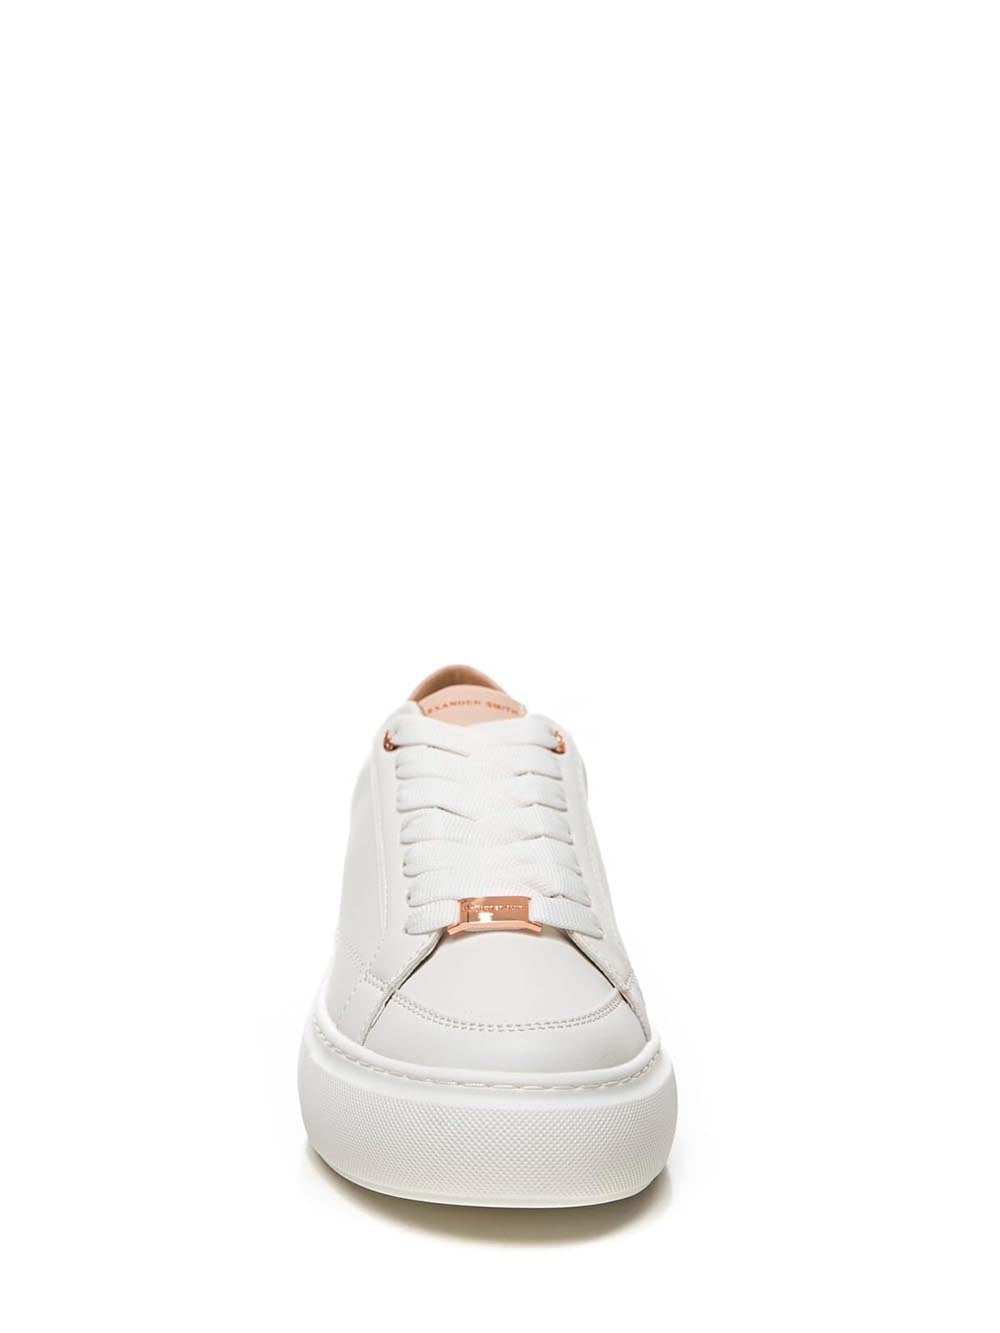 Alexander Smith Sneakers Donna Bianco/rosa